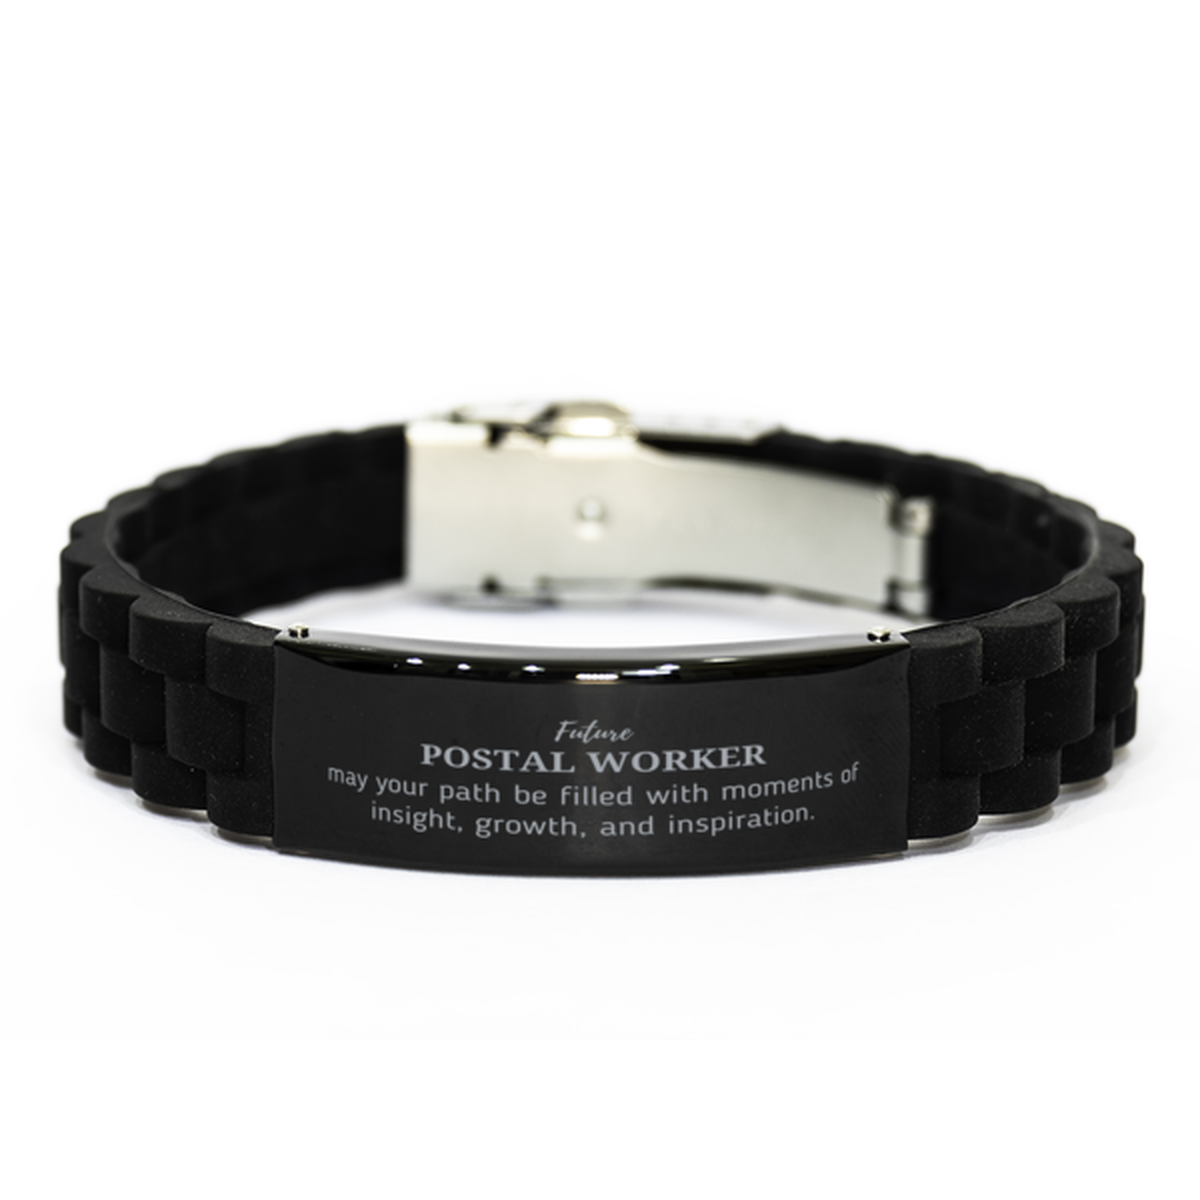 Future Postal Worker Gifts, May your path be filled with moments of insight, Graduation Gifts for New Postal Worker, Christmas Unique Black Glidelock Clasp Bracelet For Men, Women, Friends